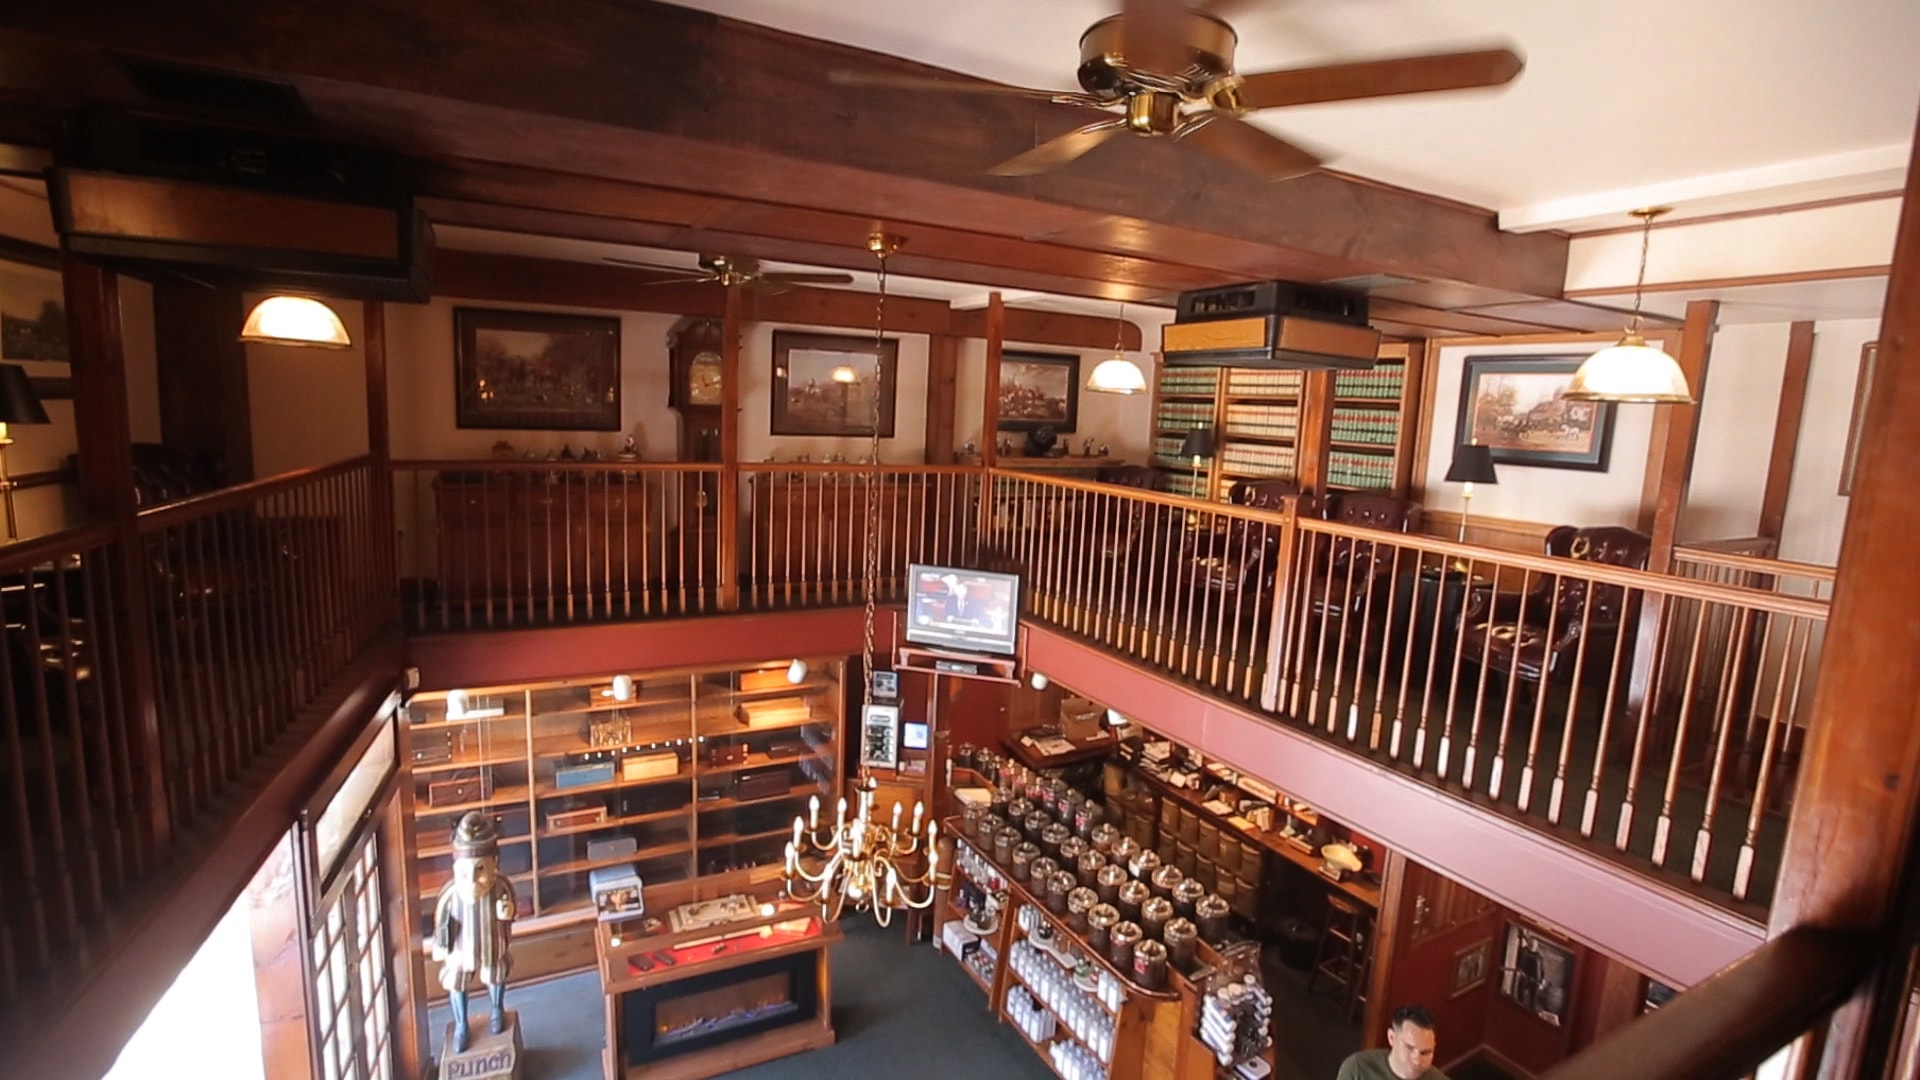   Visit our Mezzanine Lounge at    The Tobacco Shop of Ridgewood    &amp;    Davidoff Lounge    Get Directions  